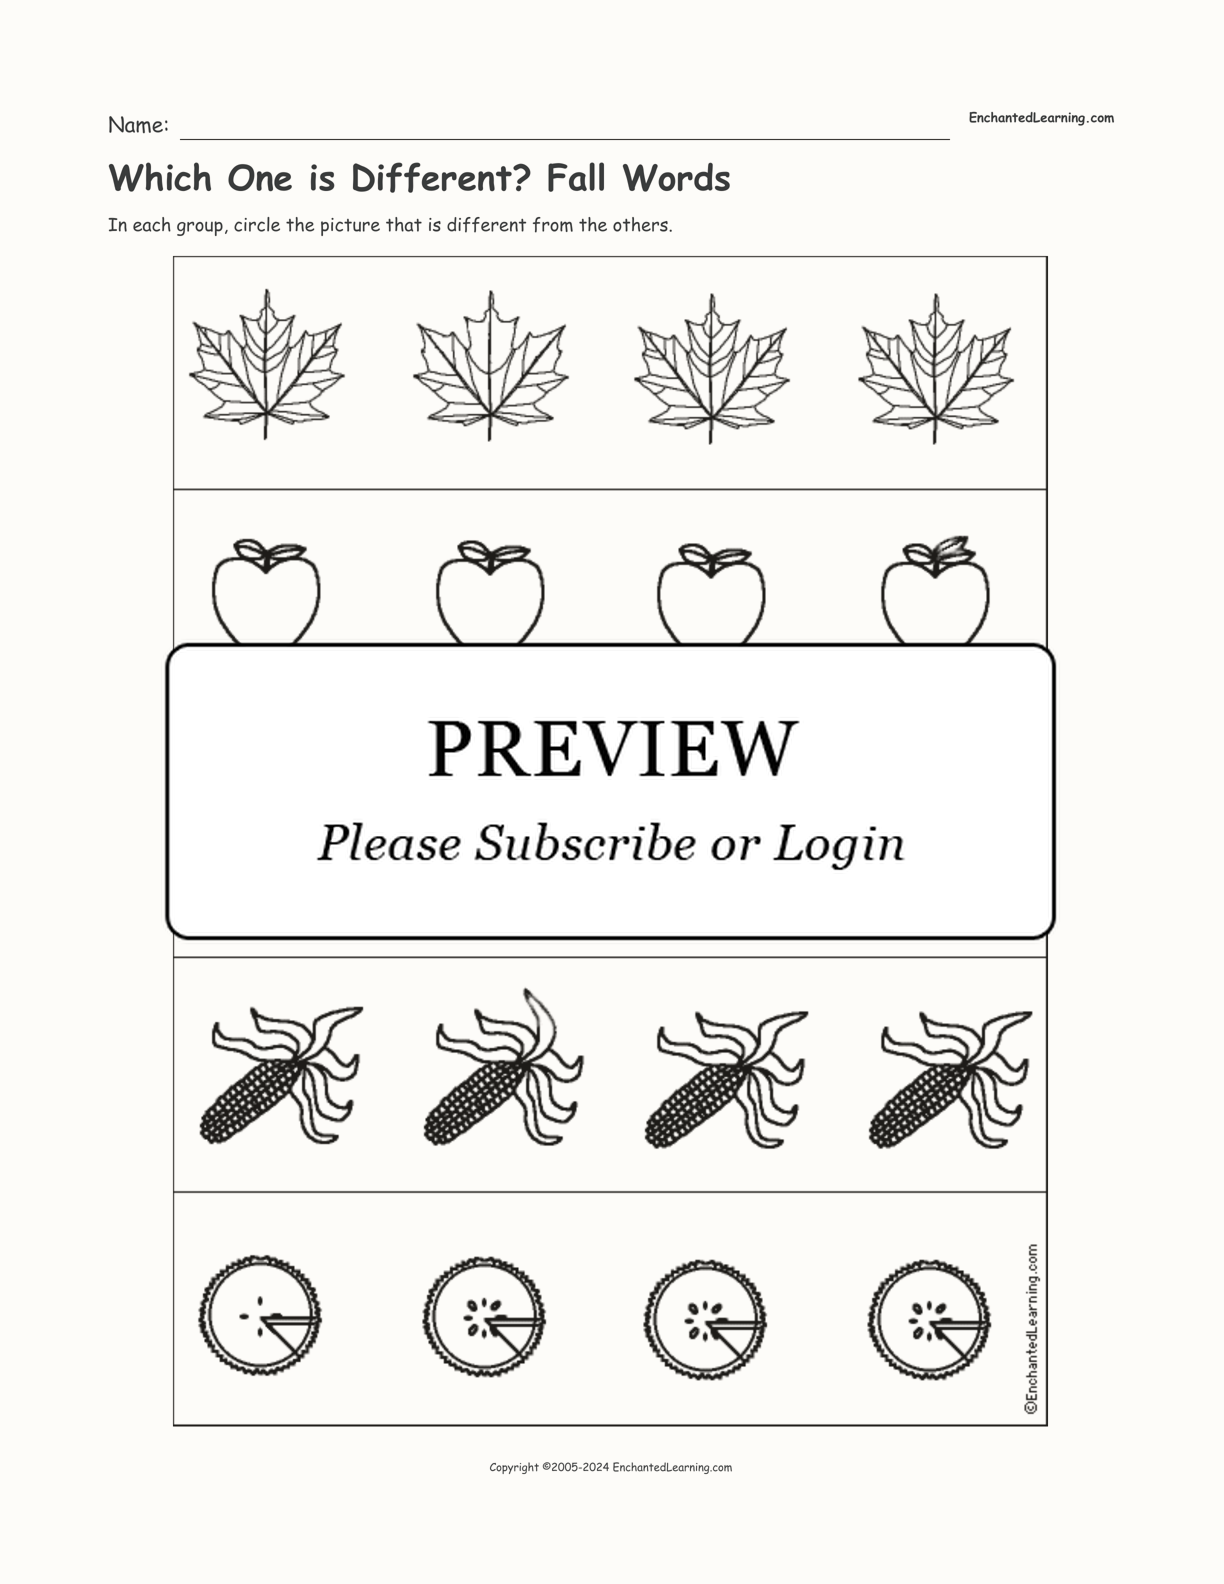 Which One is Different? Fall Words interactive worksheet page 1